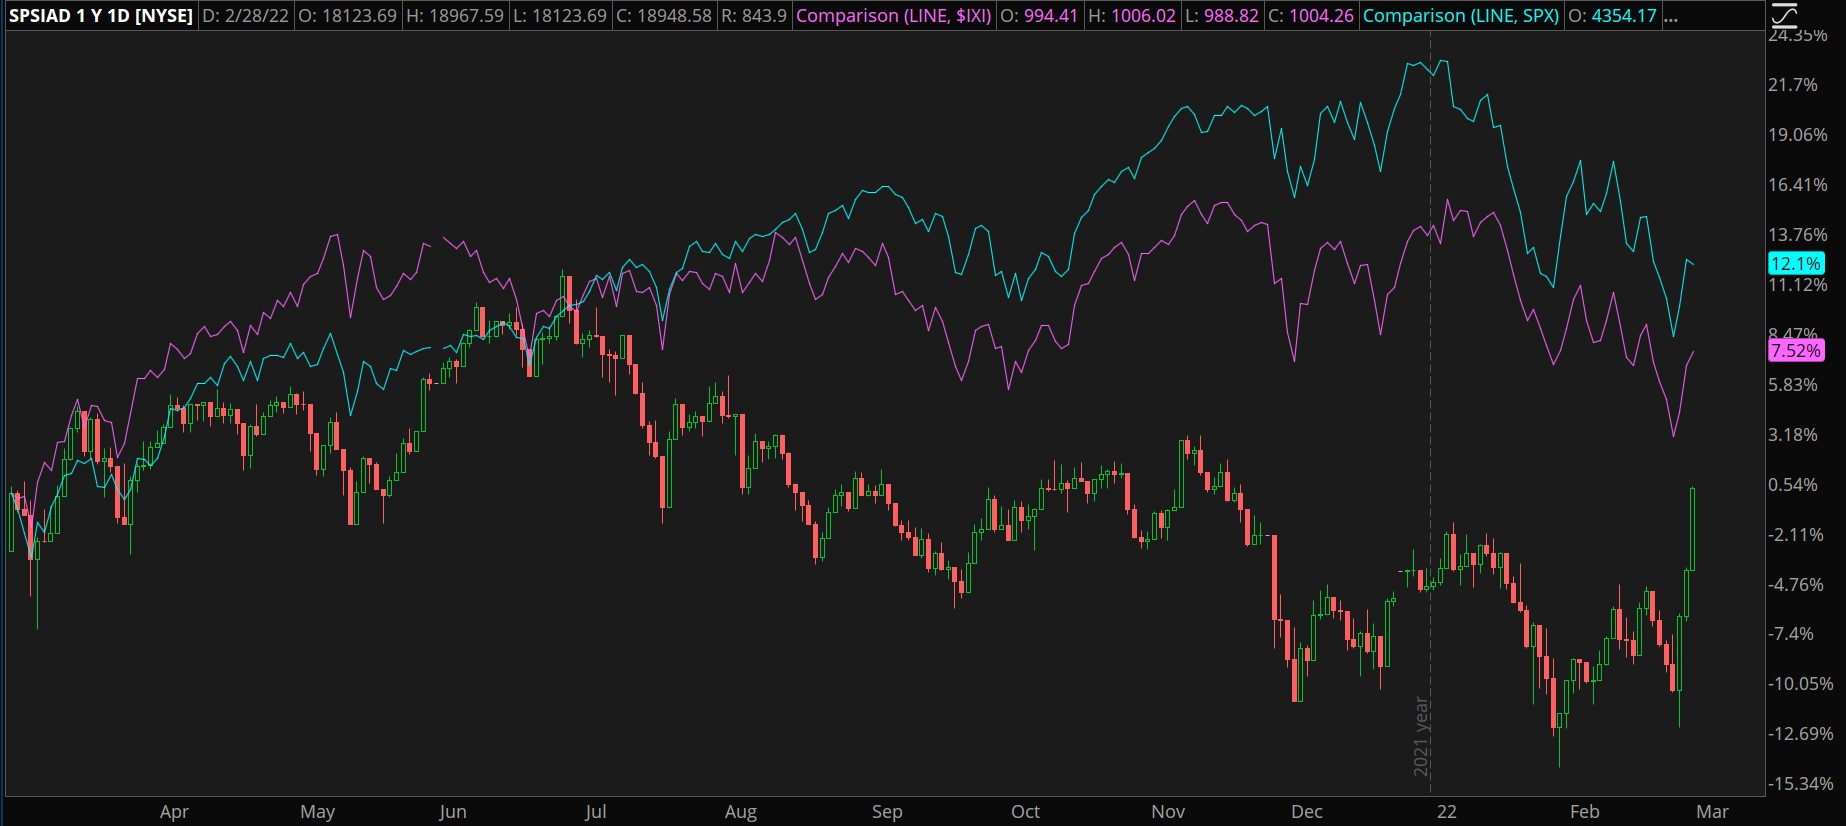 SPSIAD, S&P 500 And IXI Combined Chart.